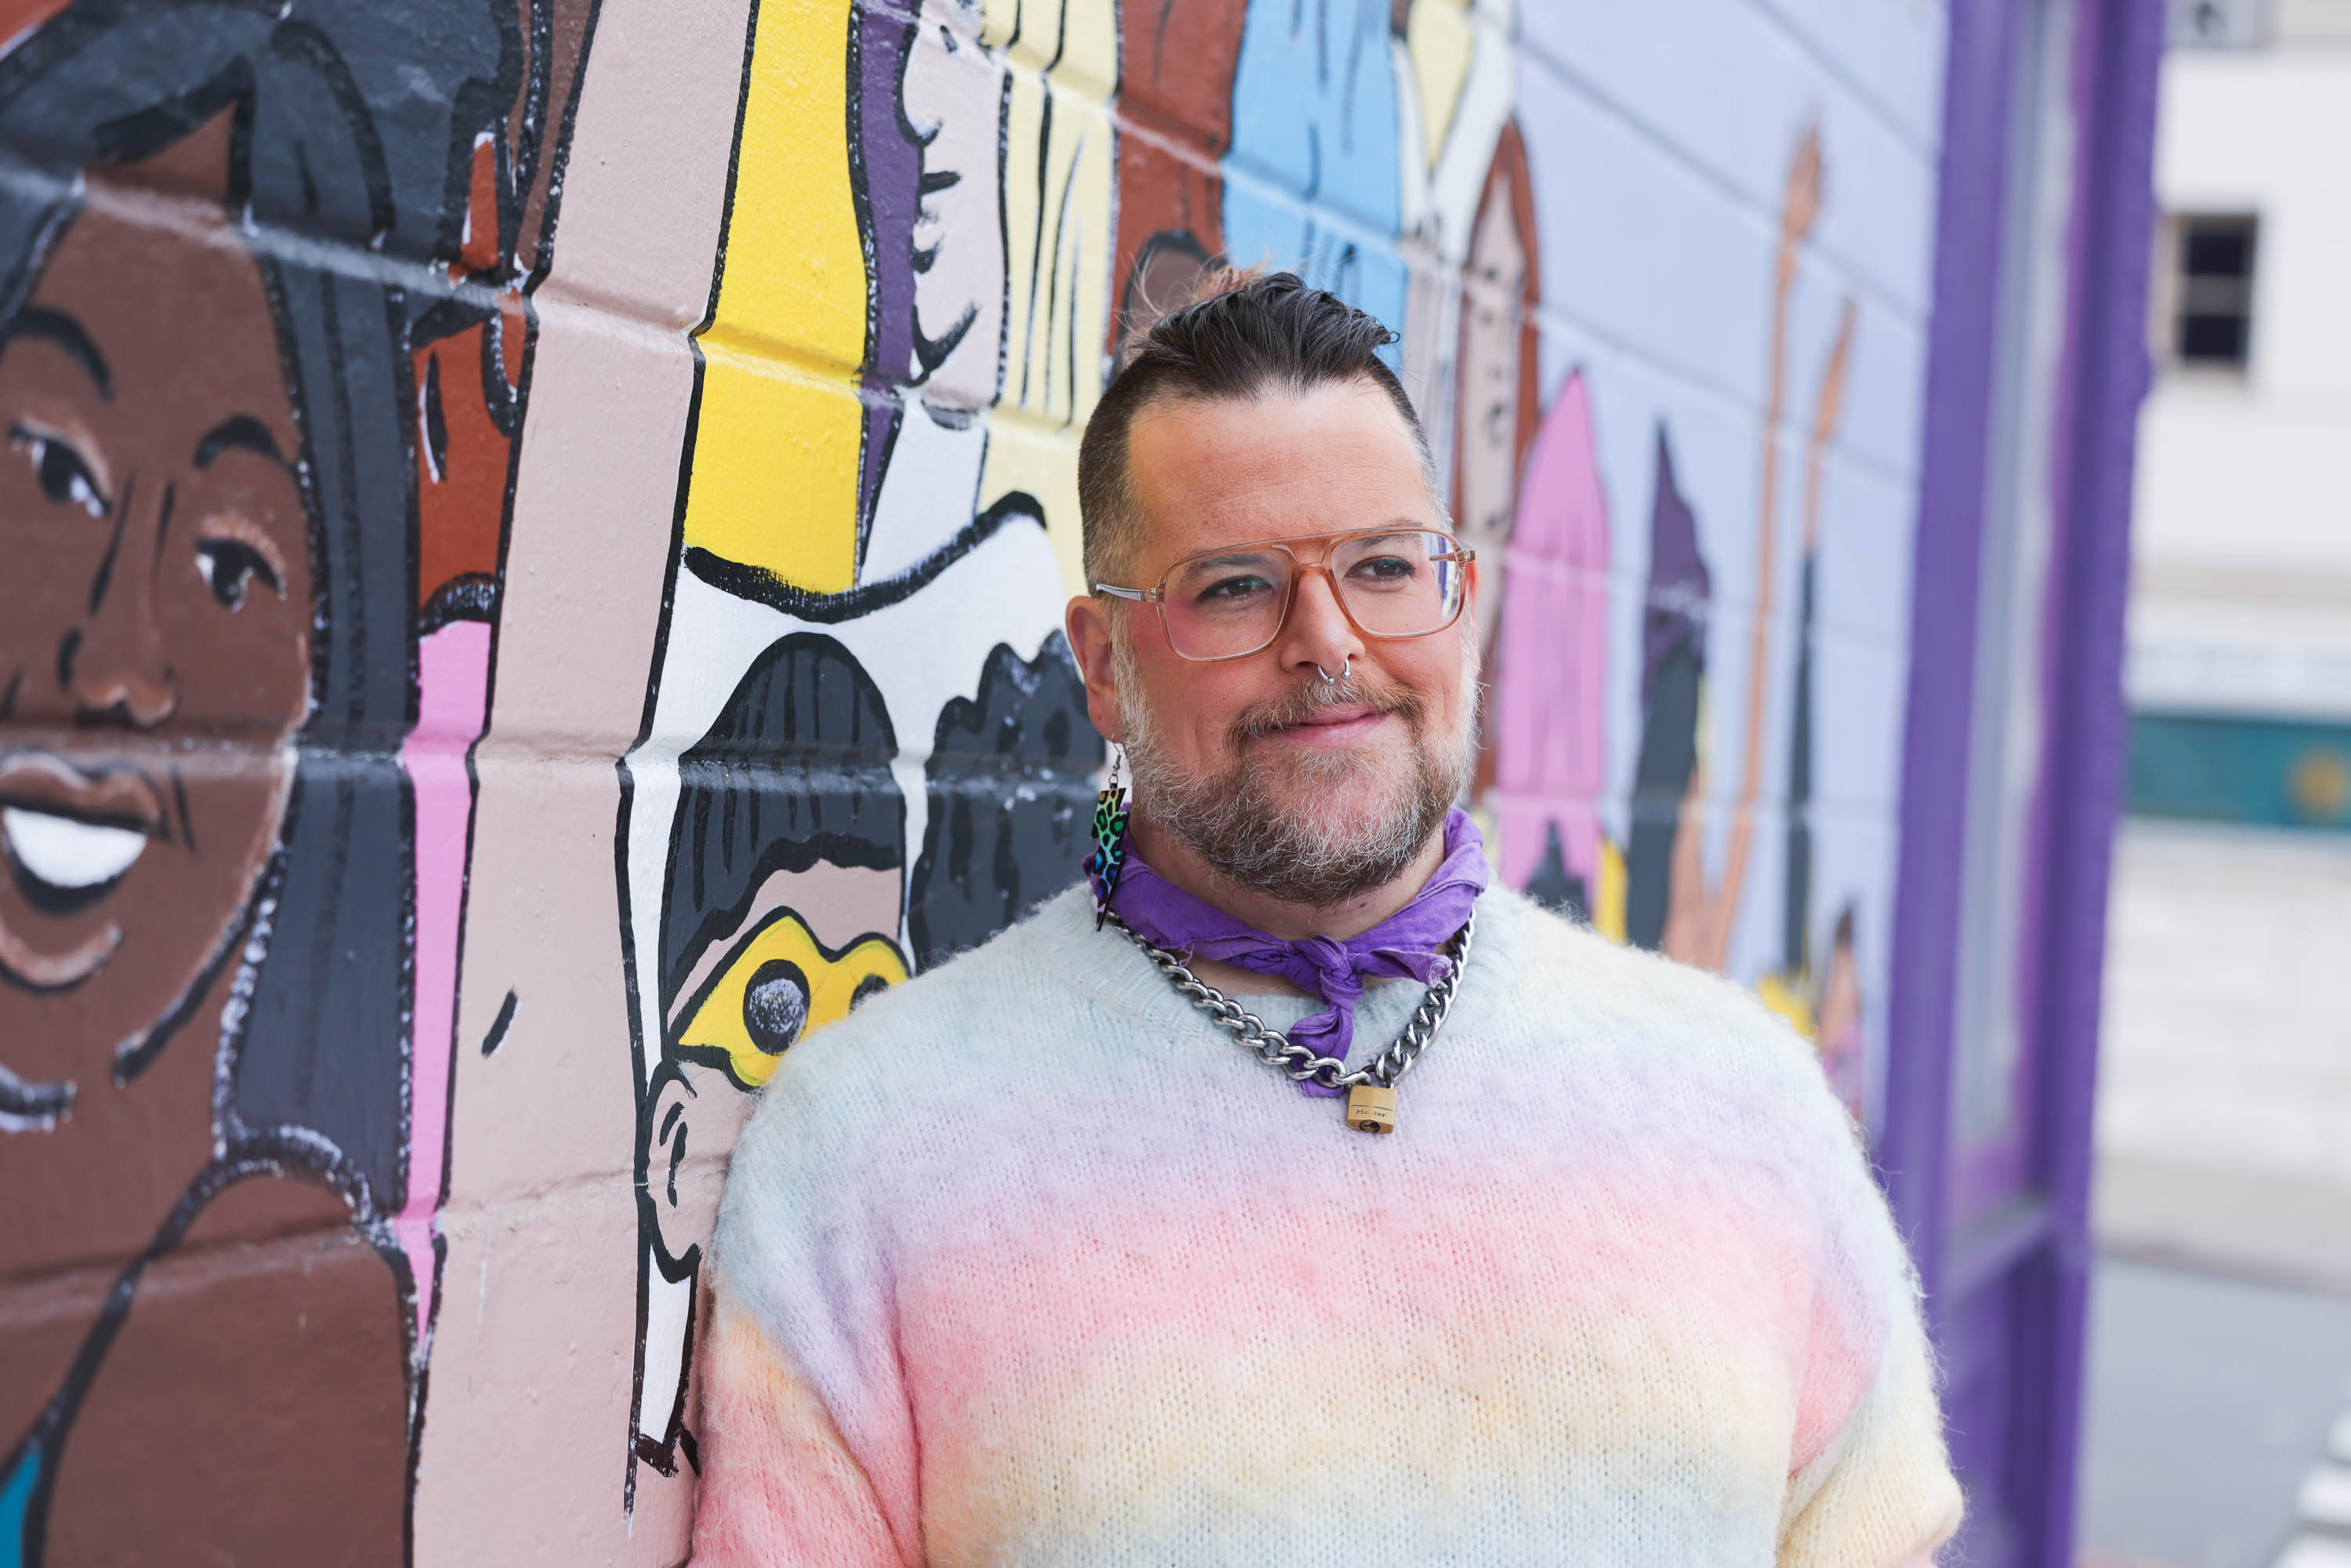 a smiling nonbinary person in glasses and a pastel sweater stands in front of a colorful exterior mural at an oblique angle.